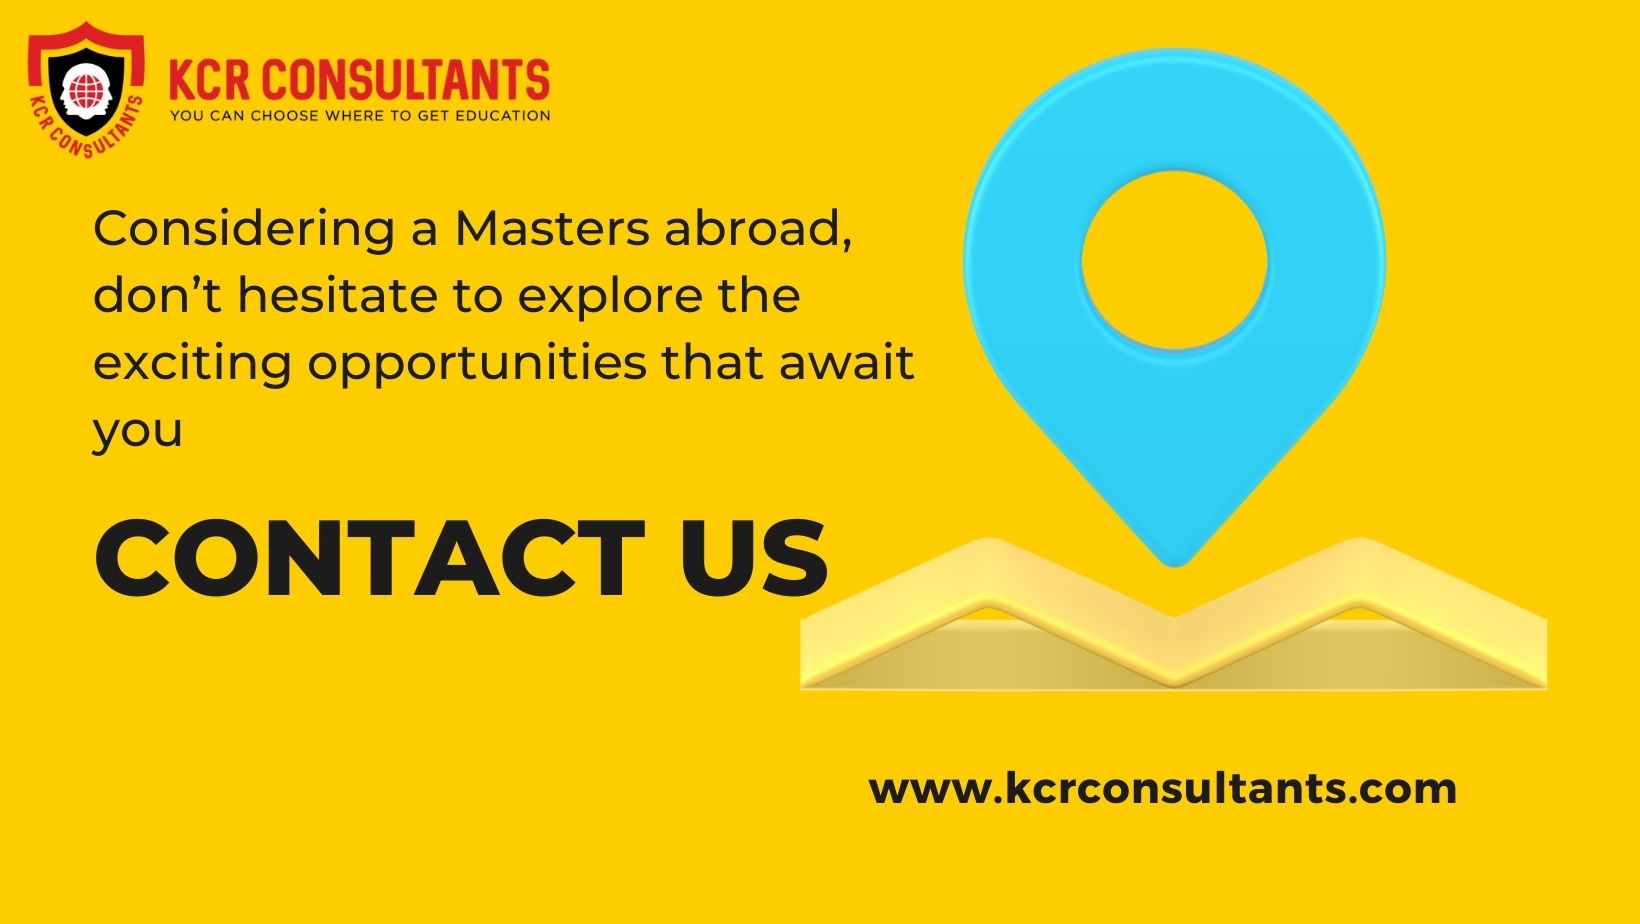 Master’s Abroad - KCR CONSULTANTS - Contactus